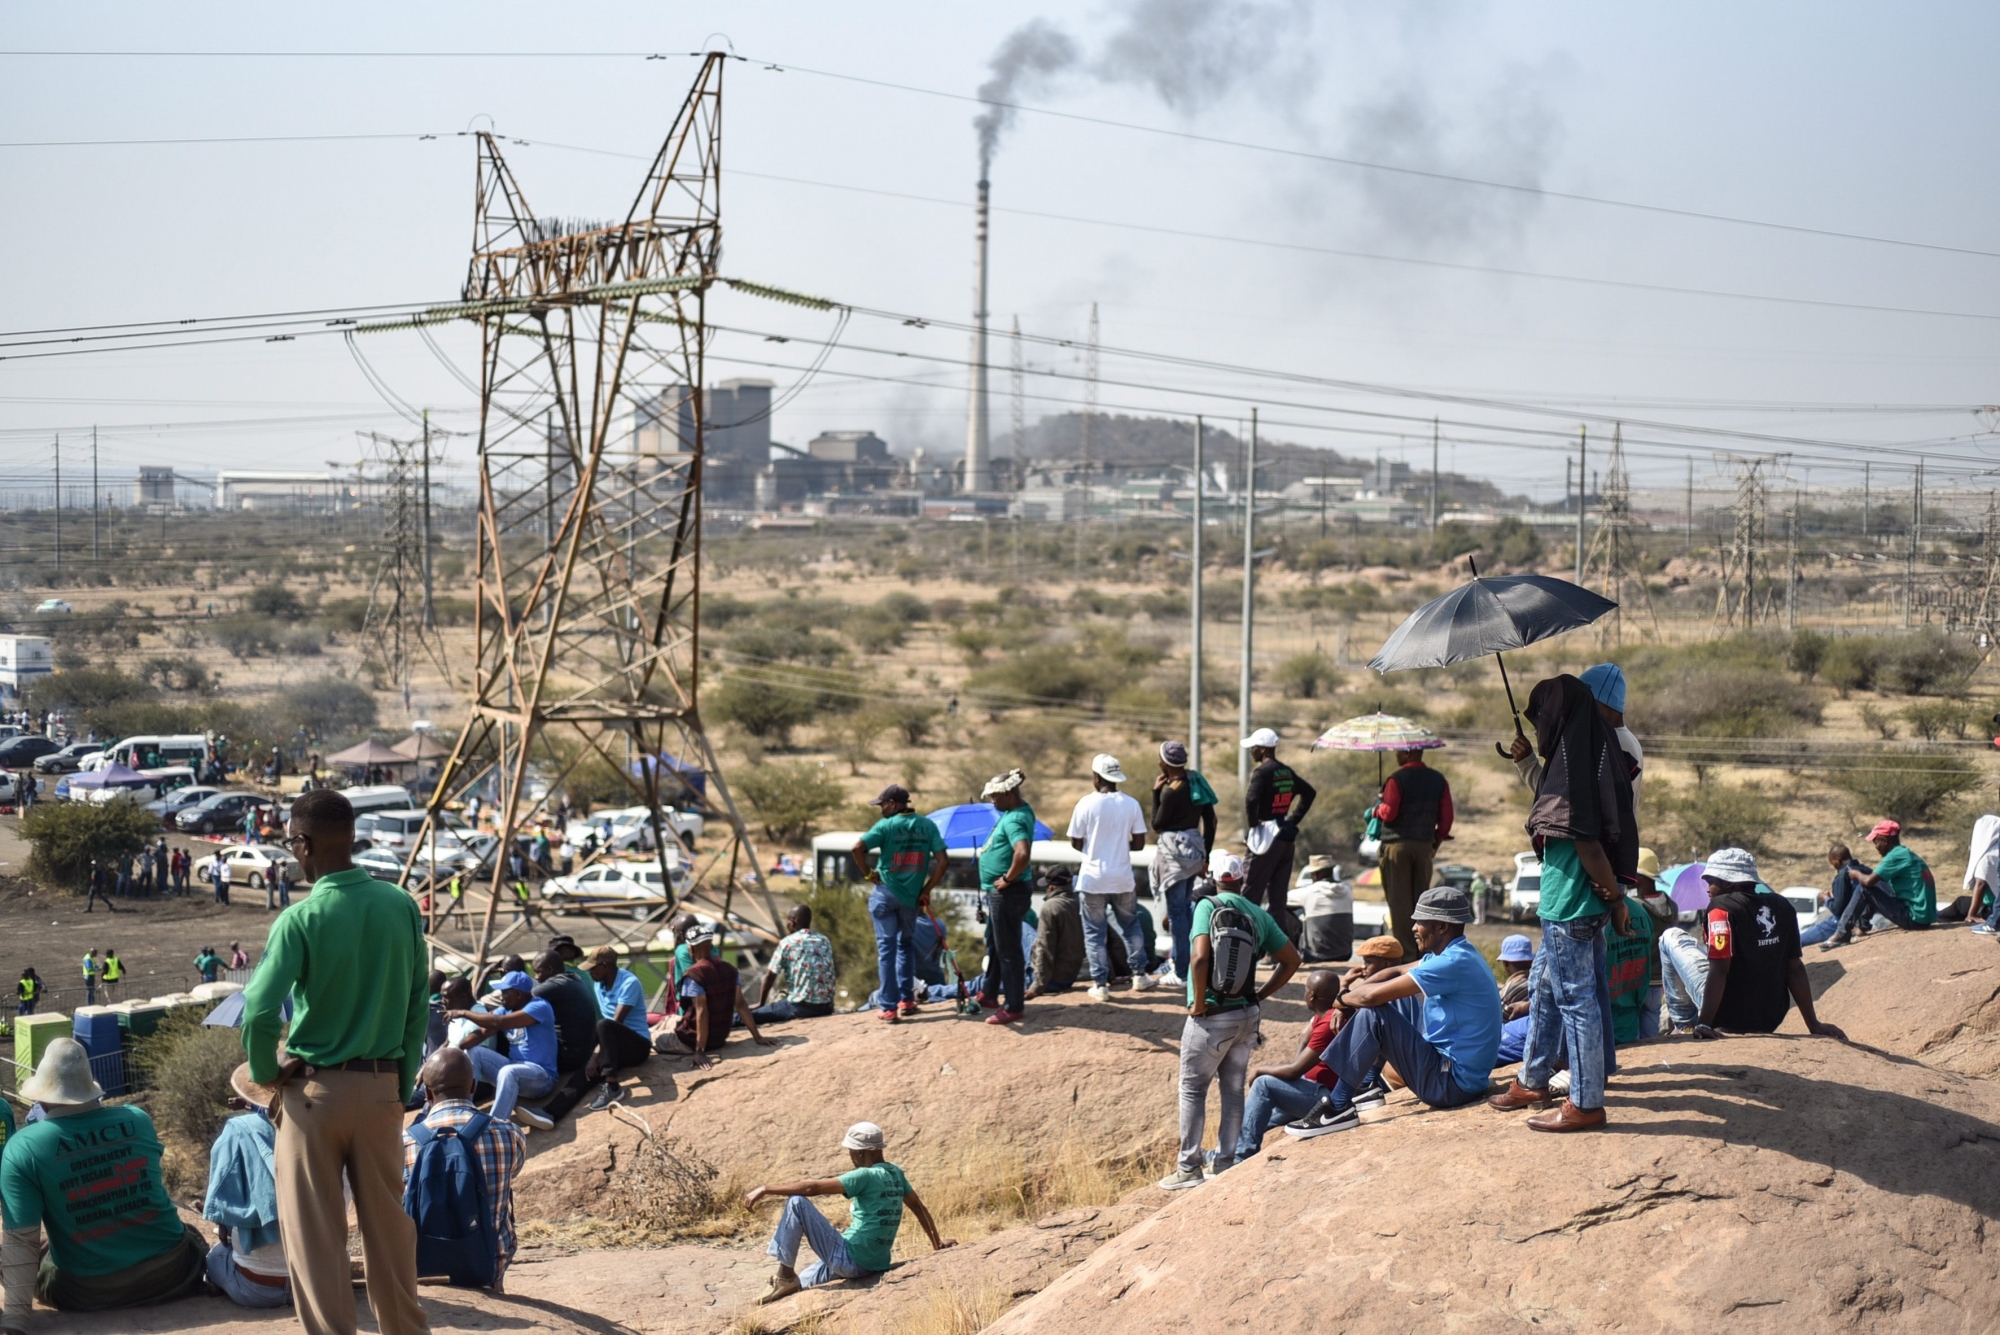 epa06952632 Miners gather on the 'Wondekop Hill' as part of the commemoration events marking the sixth anniversary of the Marikana mass shooting, in Rustenburg, South Africa, 16 August 2018. A total of 34 striking Lonmin platinum miners where killed and 70 wounded when South African Police Service (SAPS) forces opened fire with live ammunition on 16 August 2012. Although an inquest into the shooting has been completed no one has been found responsible for the shooting which is now considered a turning point in the country's history.  EPA/STR SOUTH AFRICA MARIKANA SHOOTING ANNIVERSARY